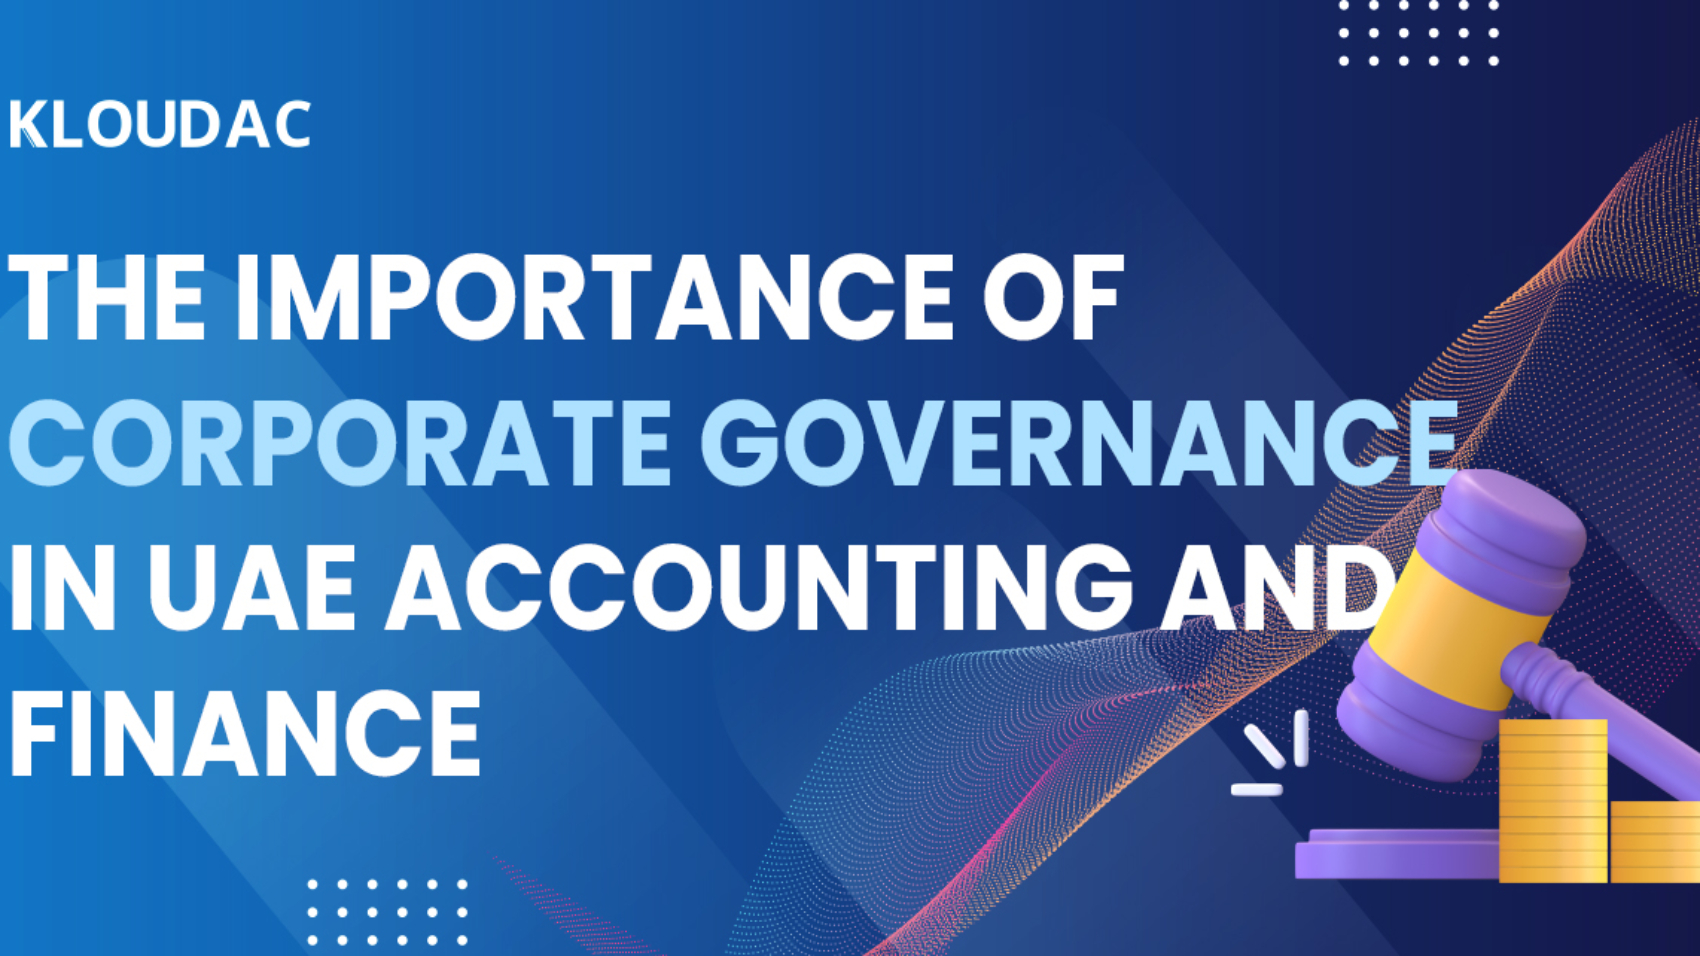 6. The importance of corporate governance in UAE accounting and finance